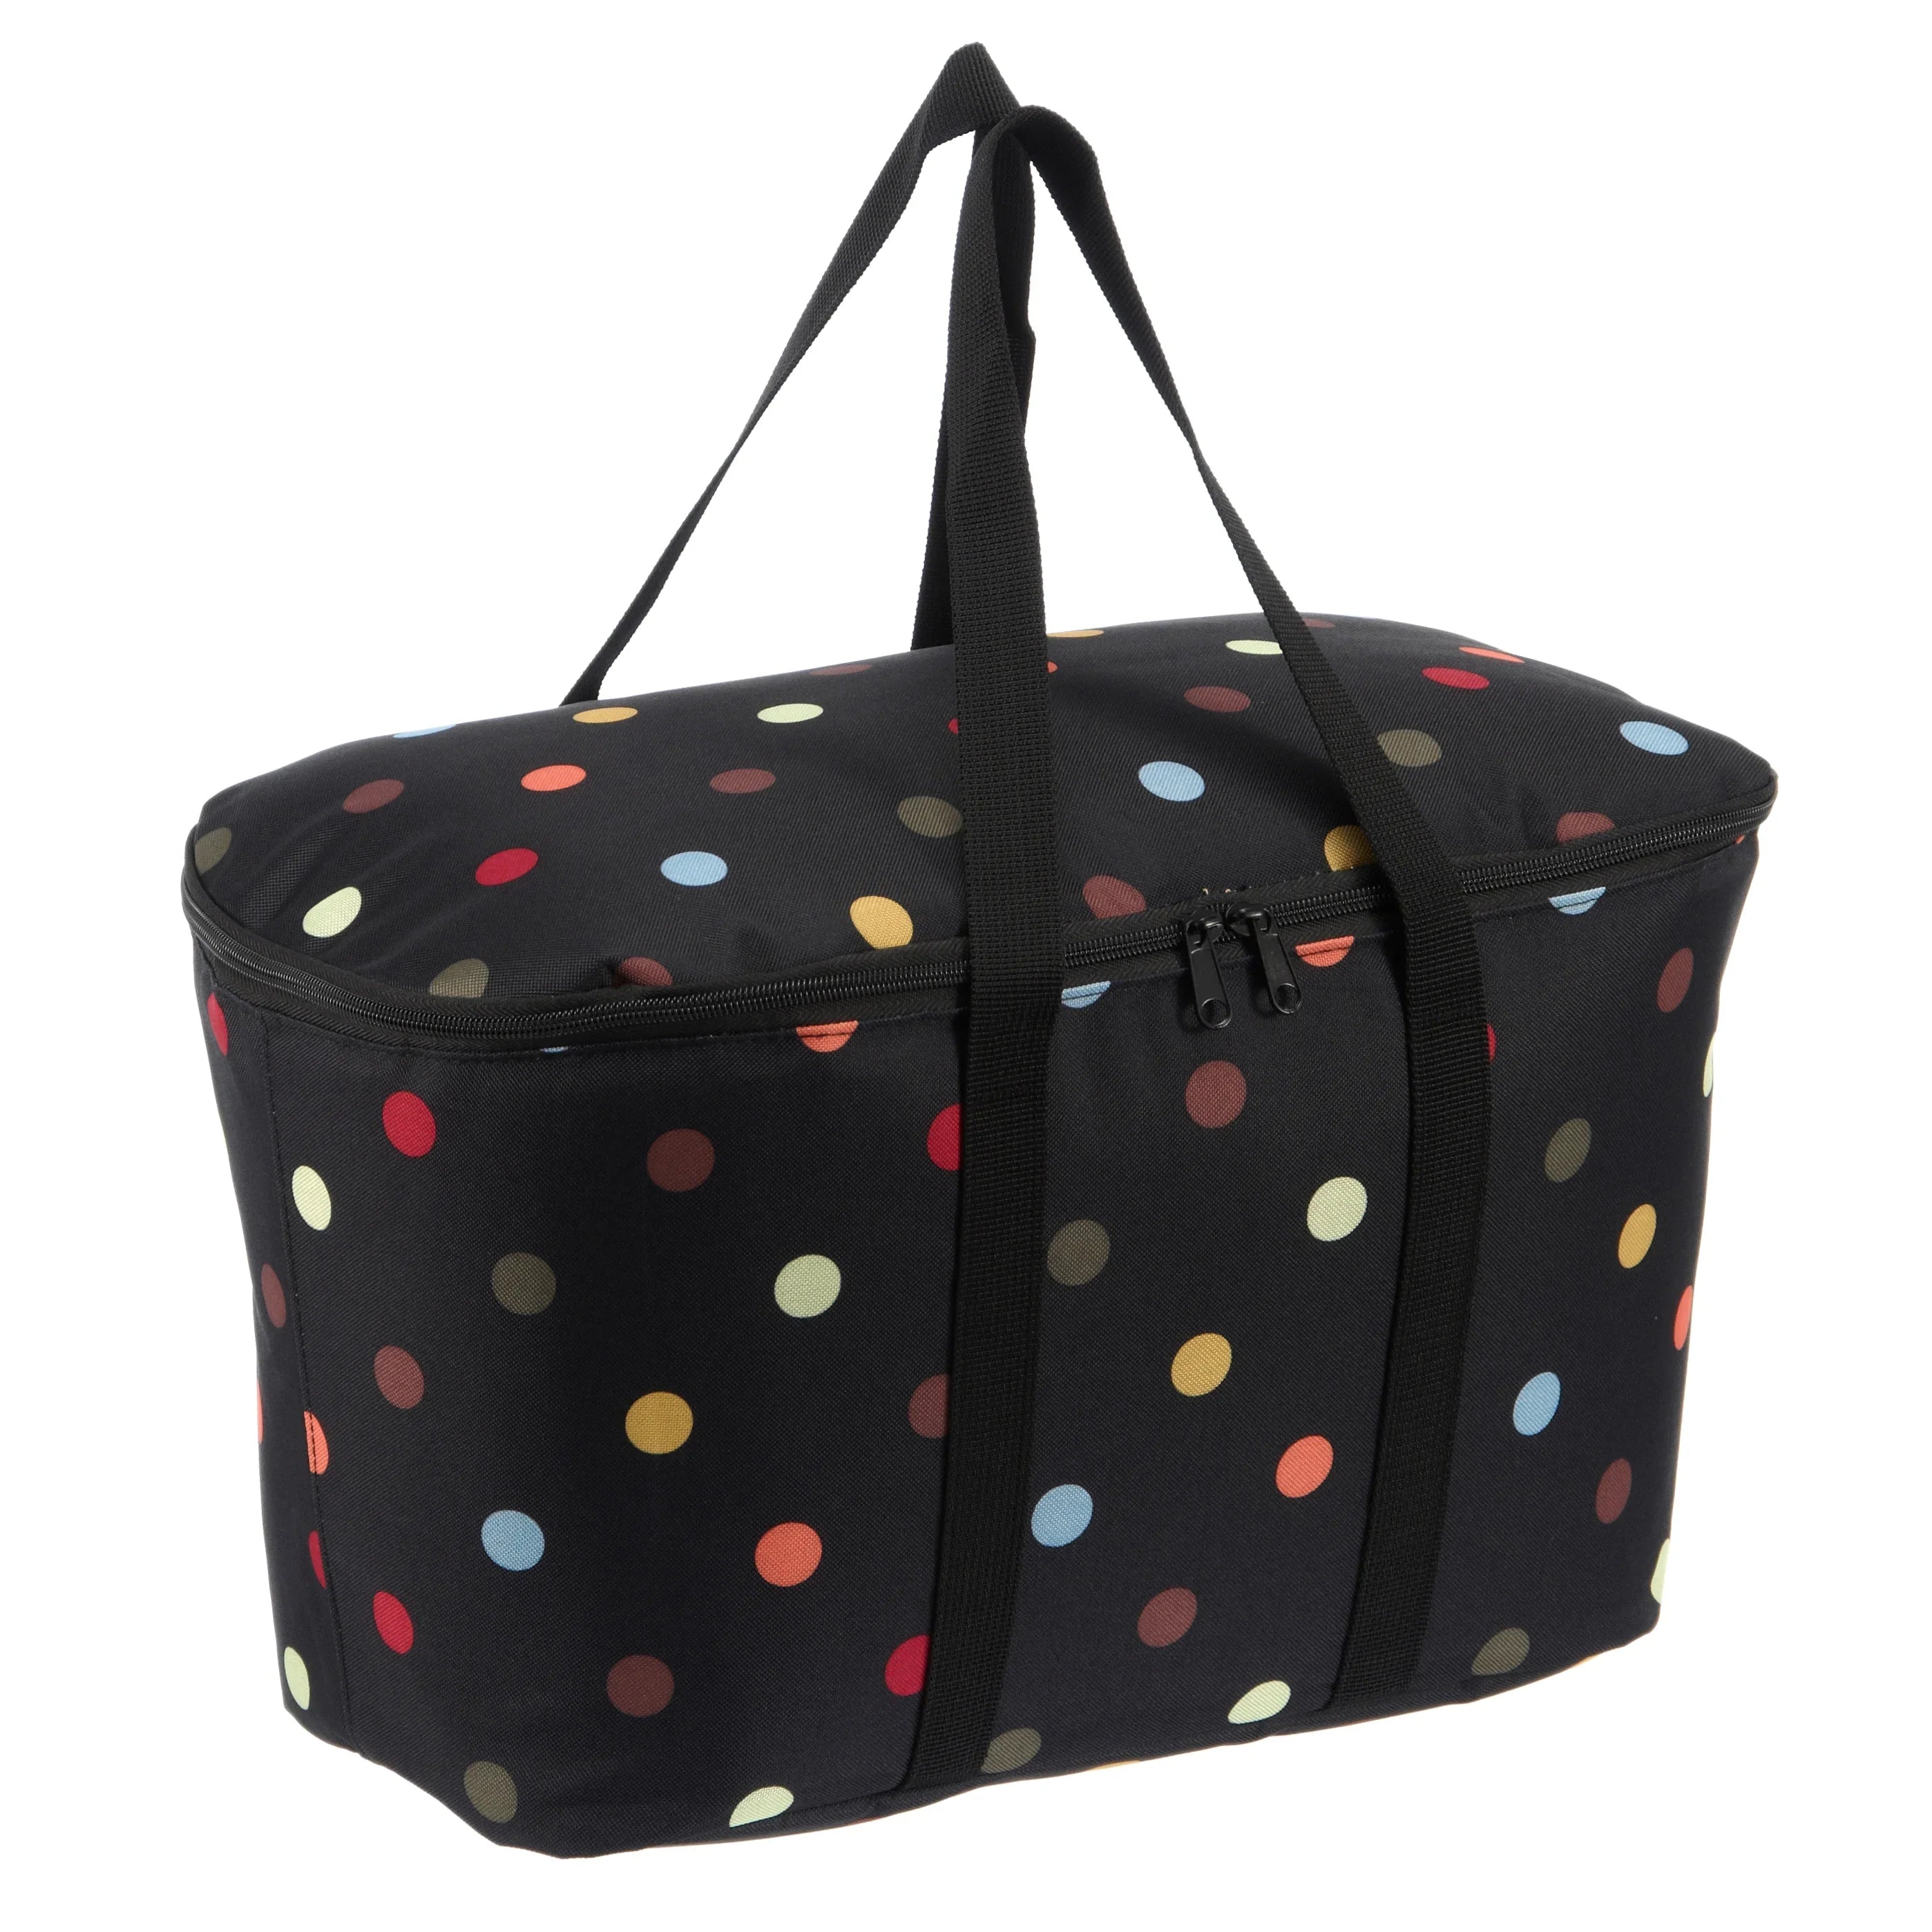 Reisenthel Shopping Coolerbag sac isotherme 44 cm - à pois